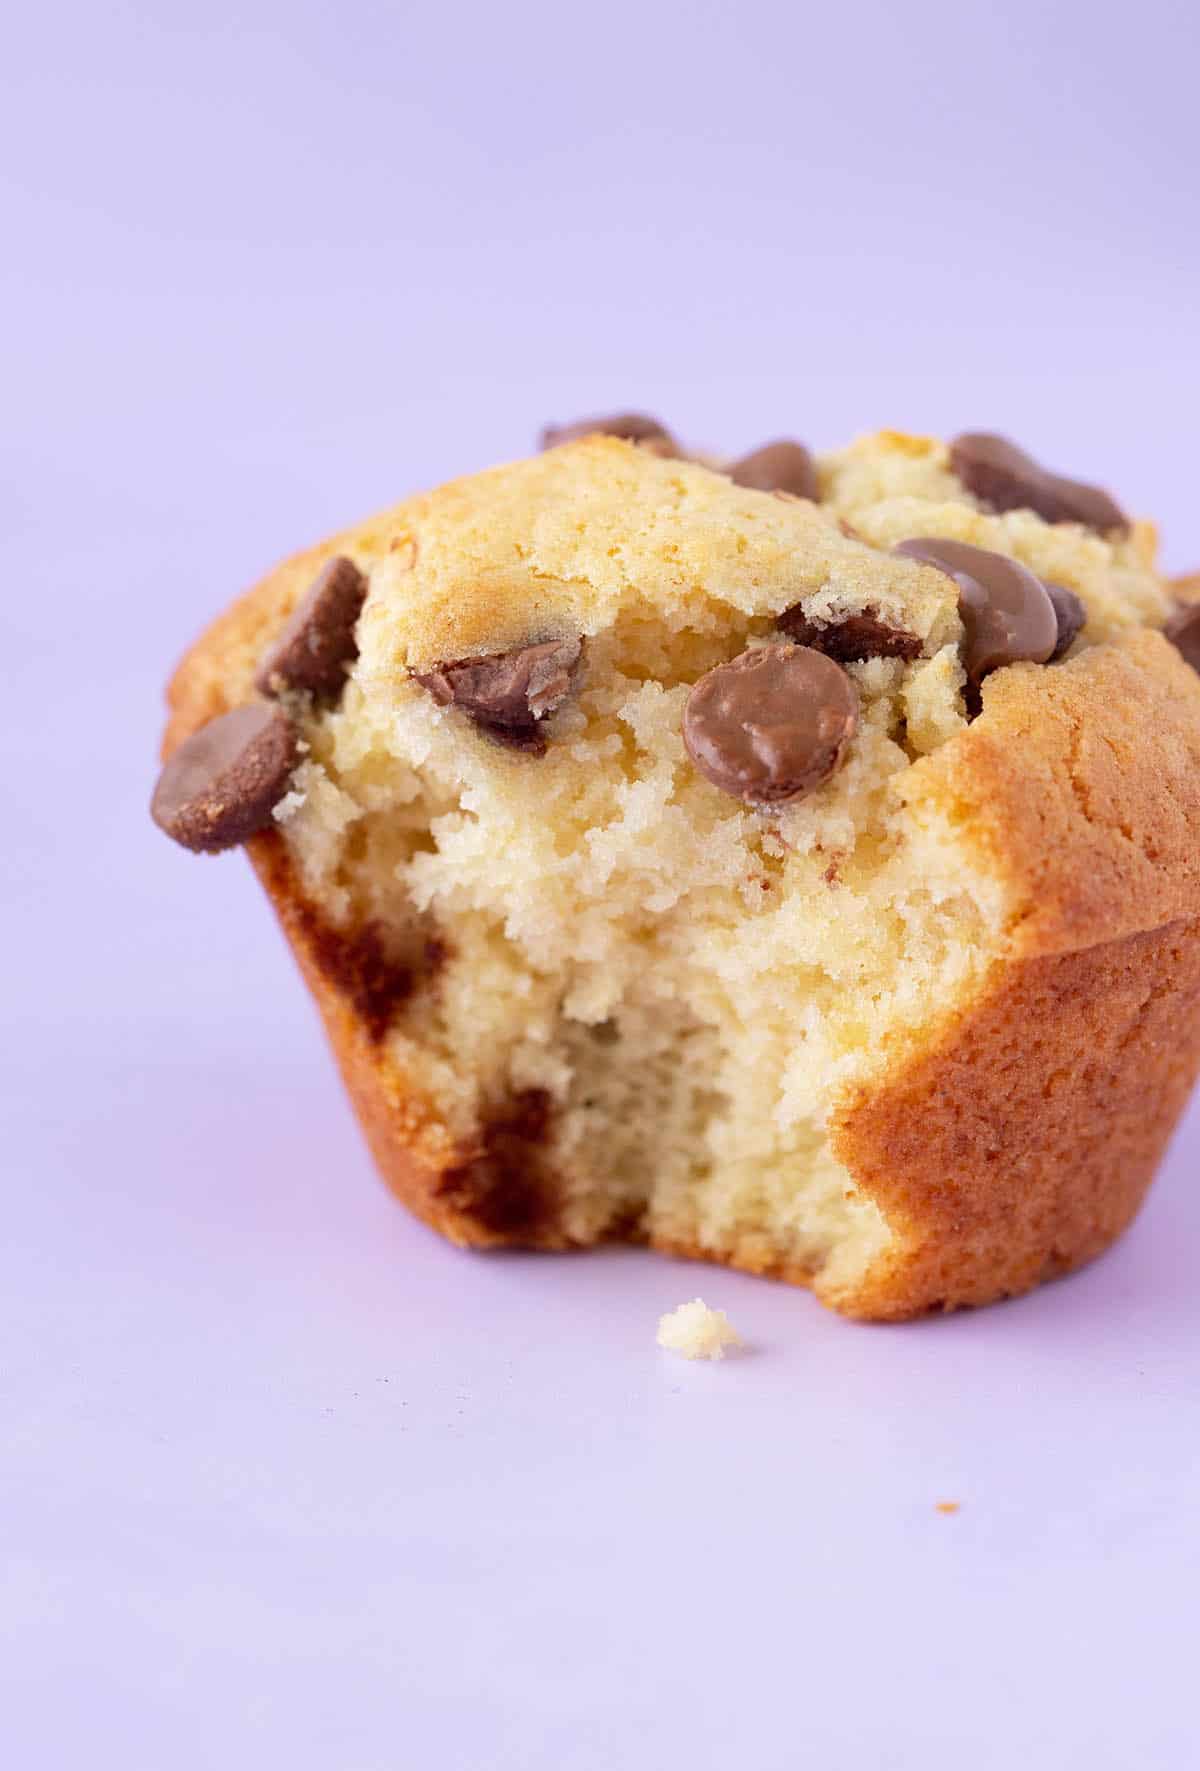 Close up of a Small Batch Chocolate Chip Muffin with a bite taken out of it - showing its soft and fluffy centre.